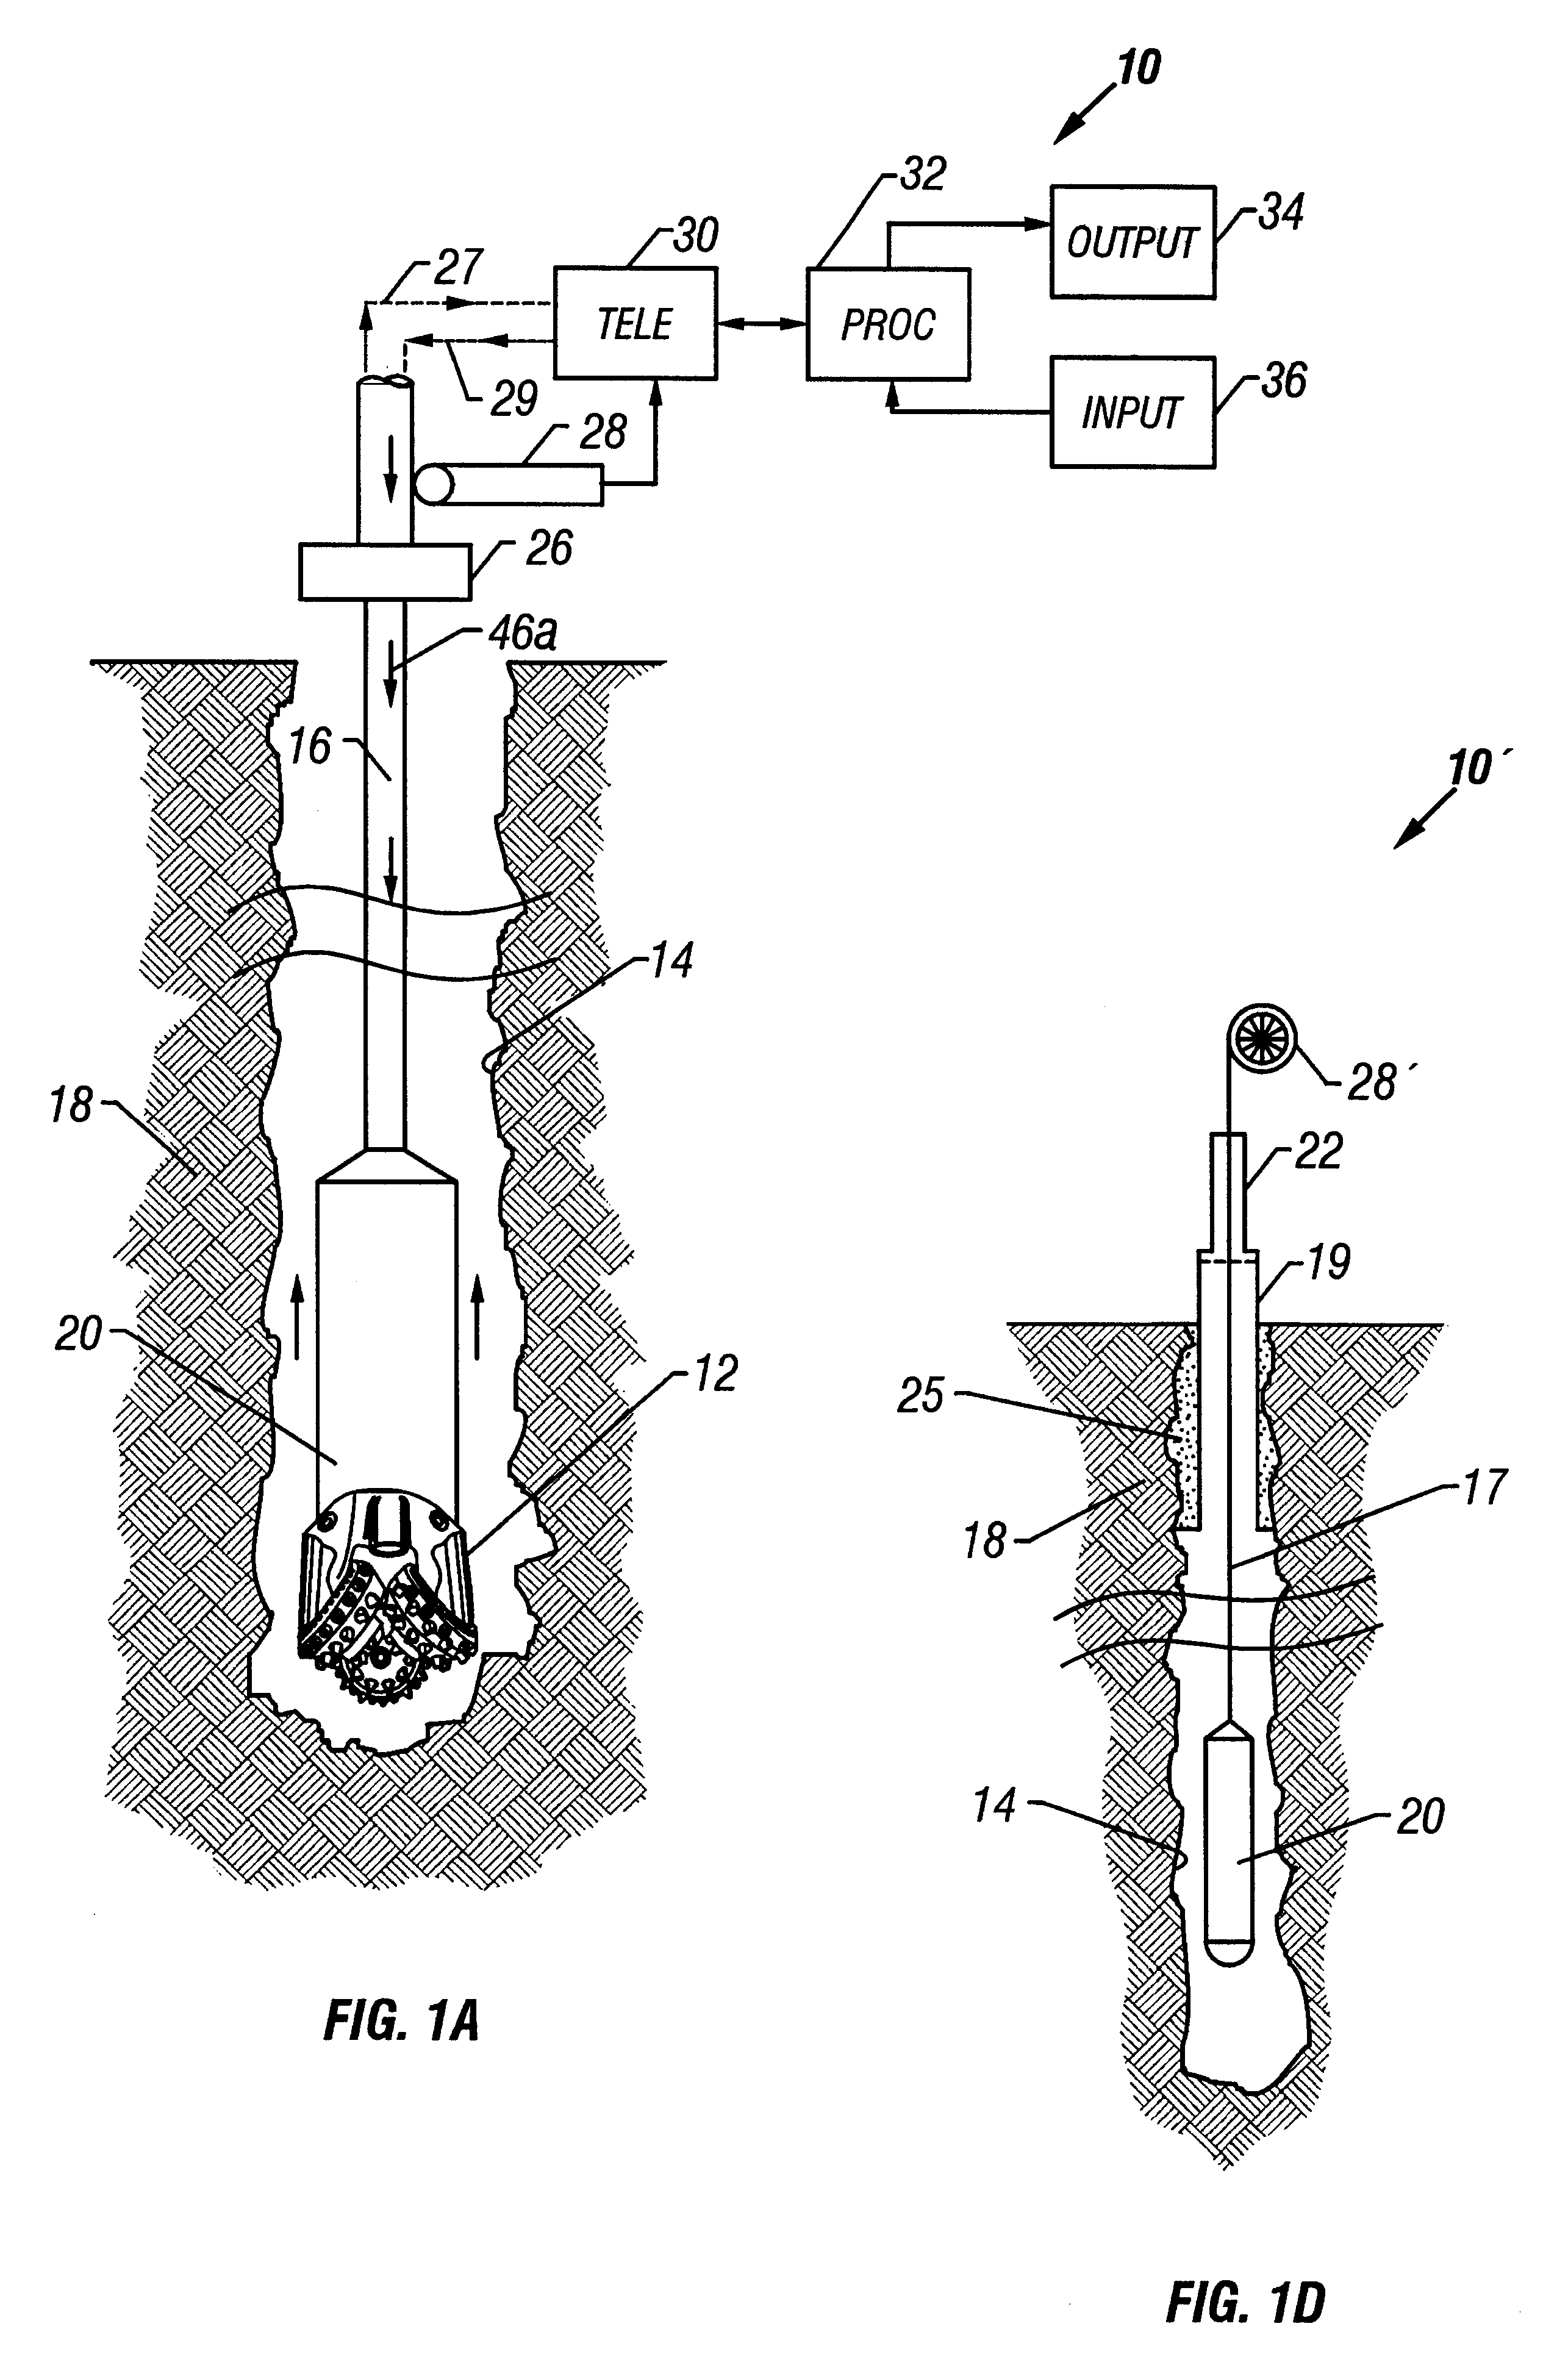 Drilling system with downhole apparatus for determining parameters of interest and for adjusting drilling direction in response thereto